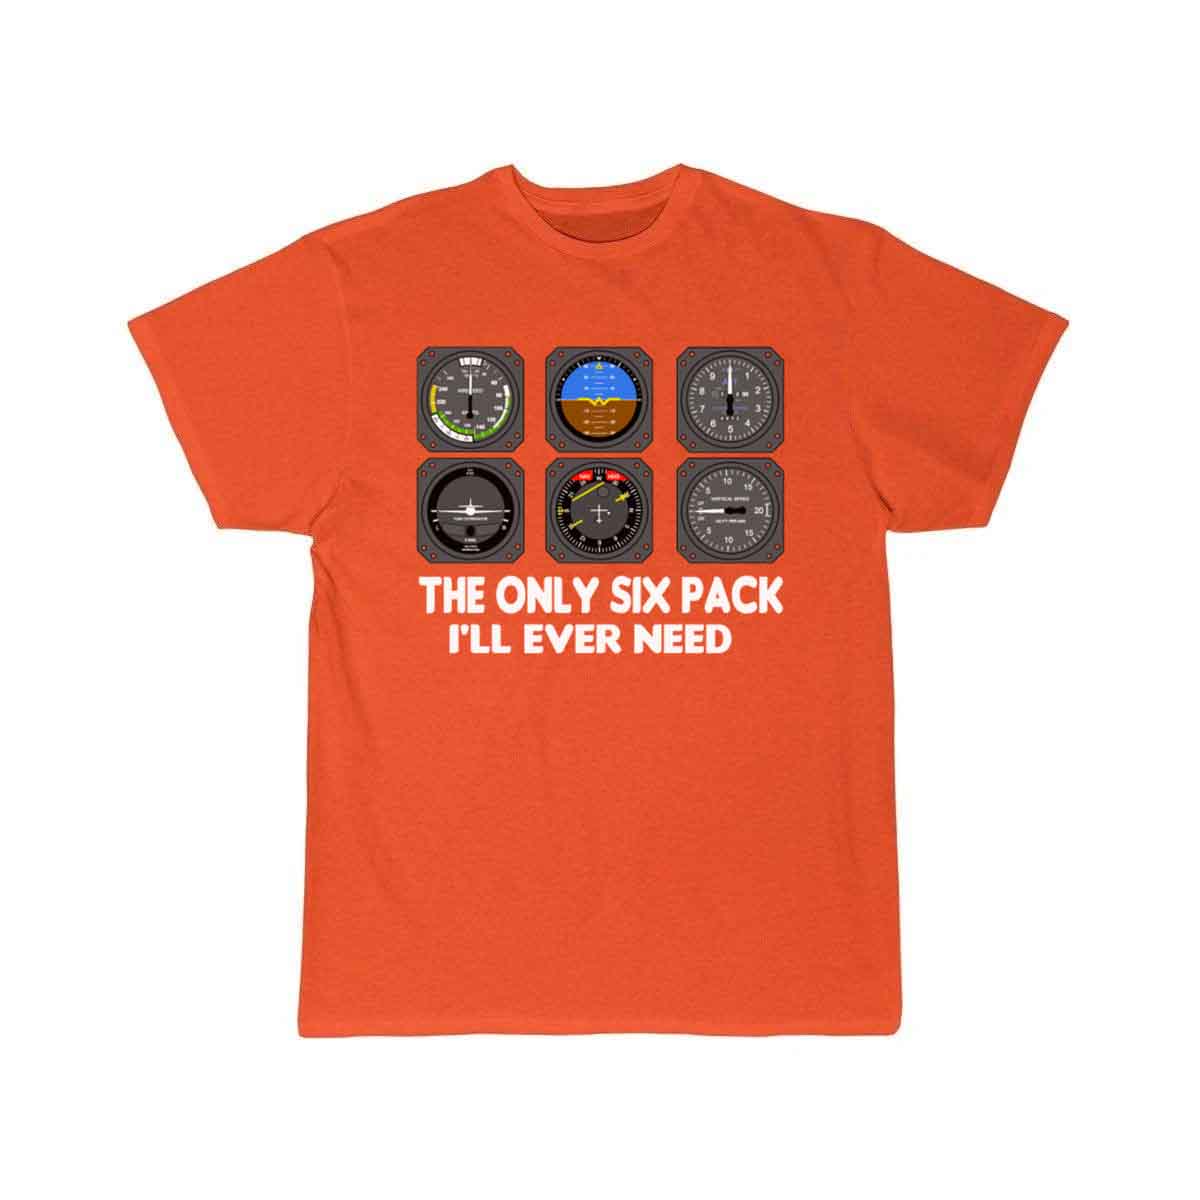 The Only Six Pack I'll Ever Need - Funny T-SHIRT THE AV8R